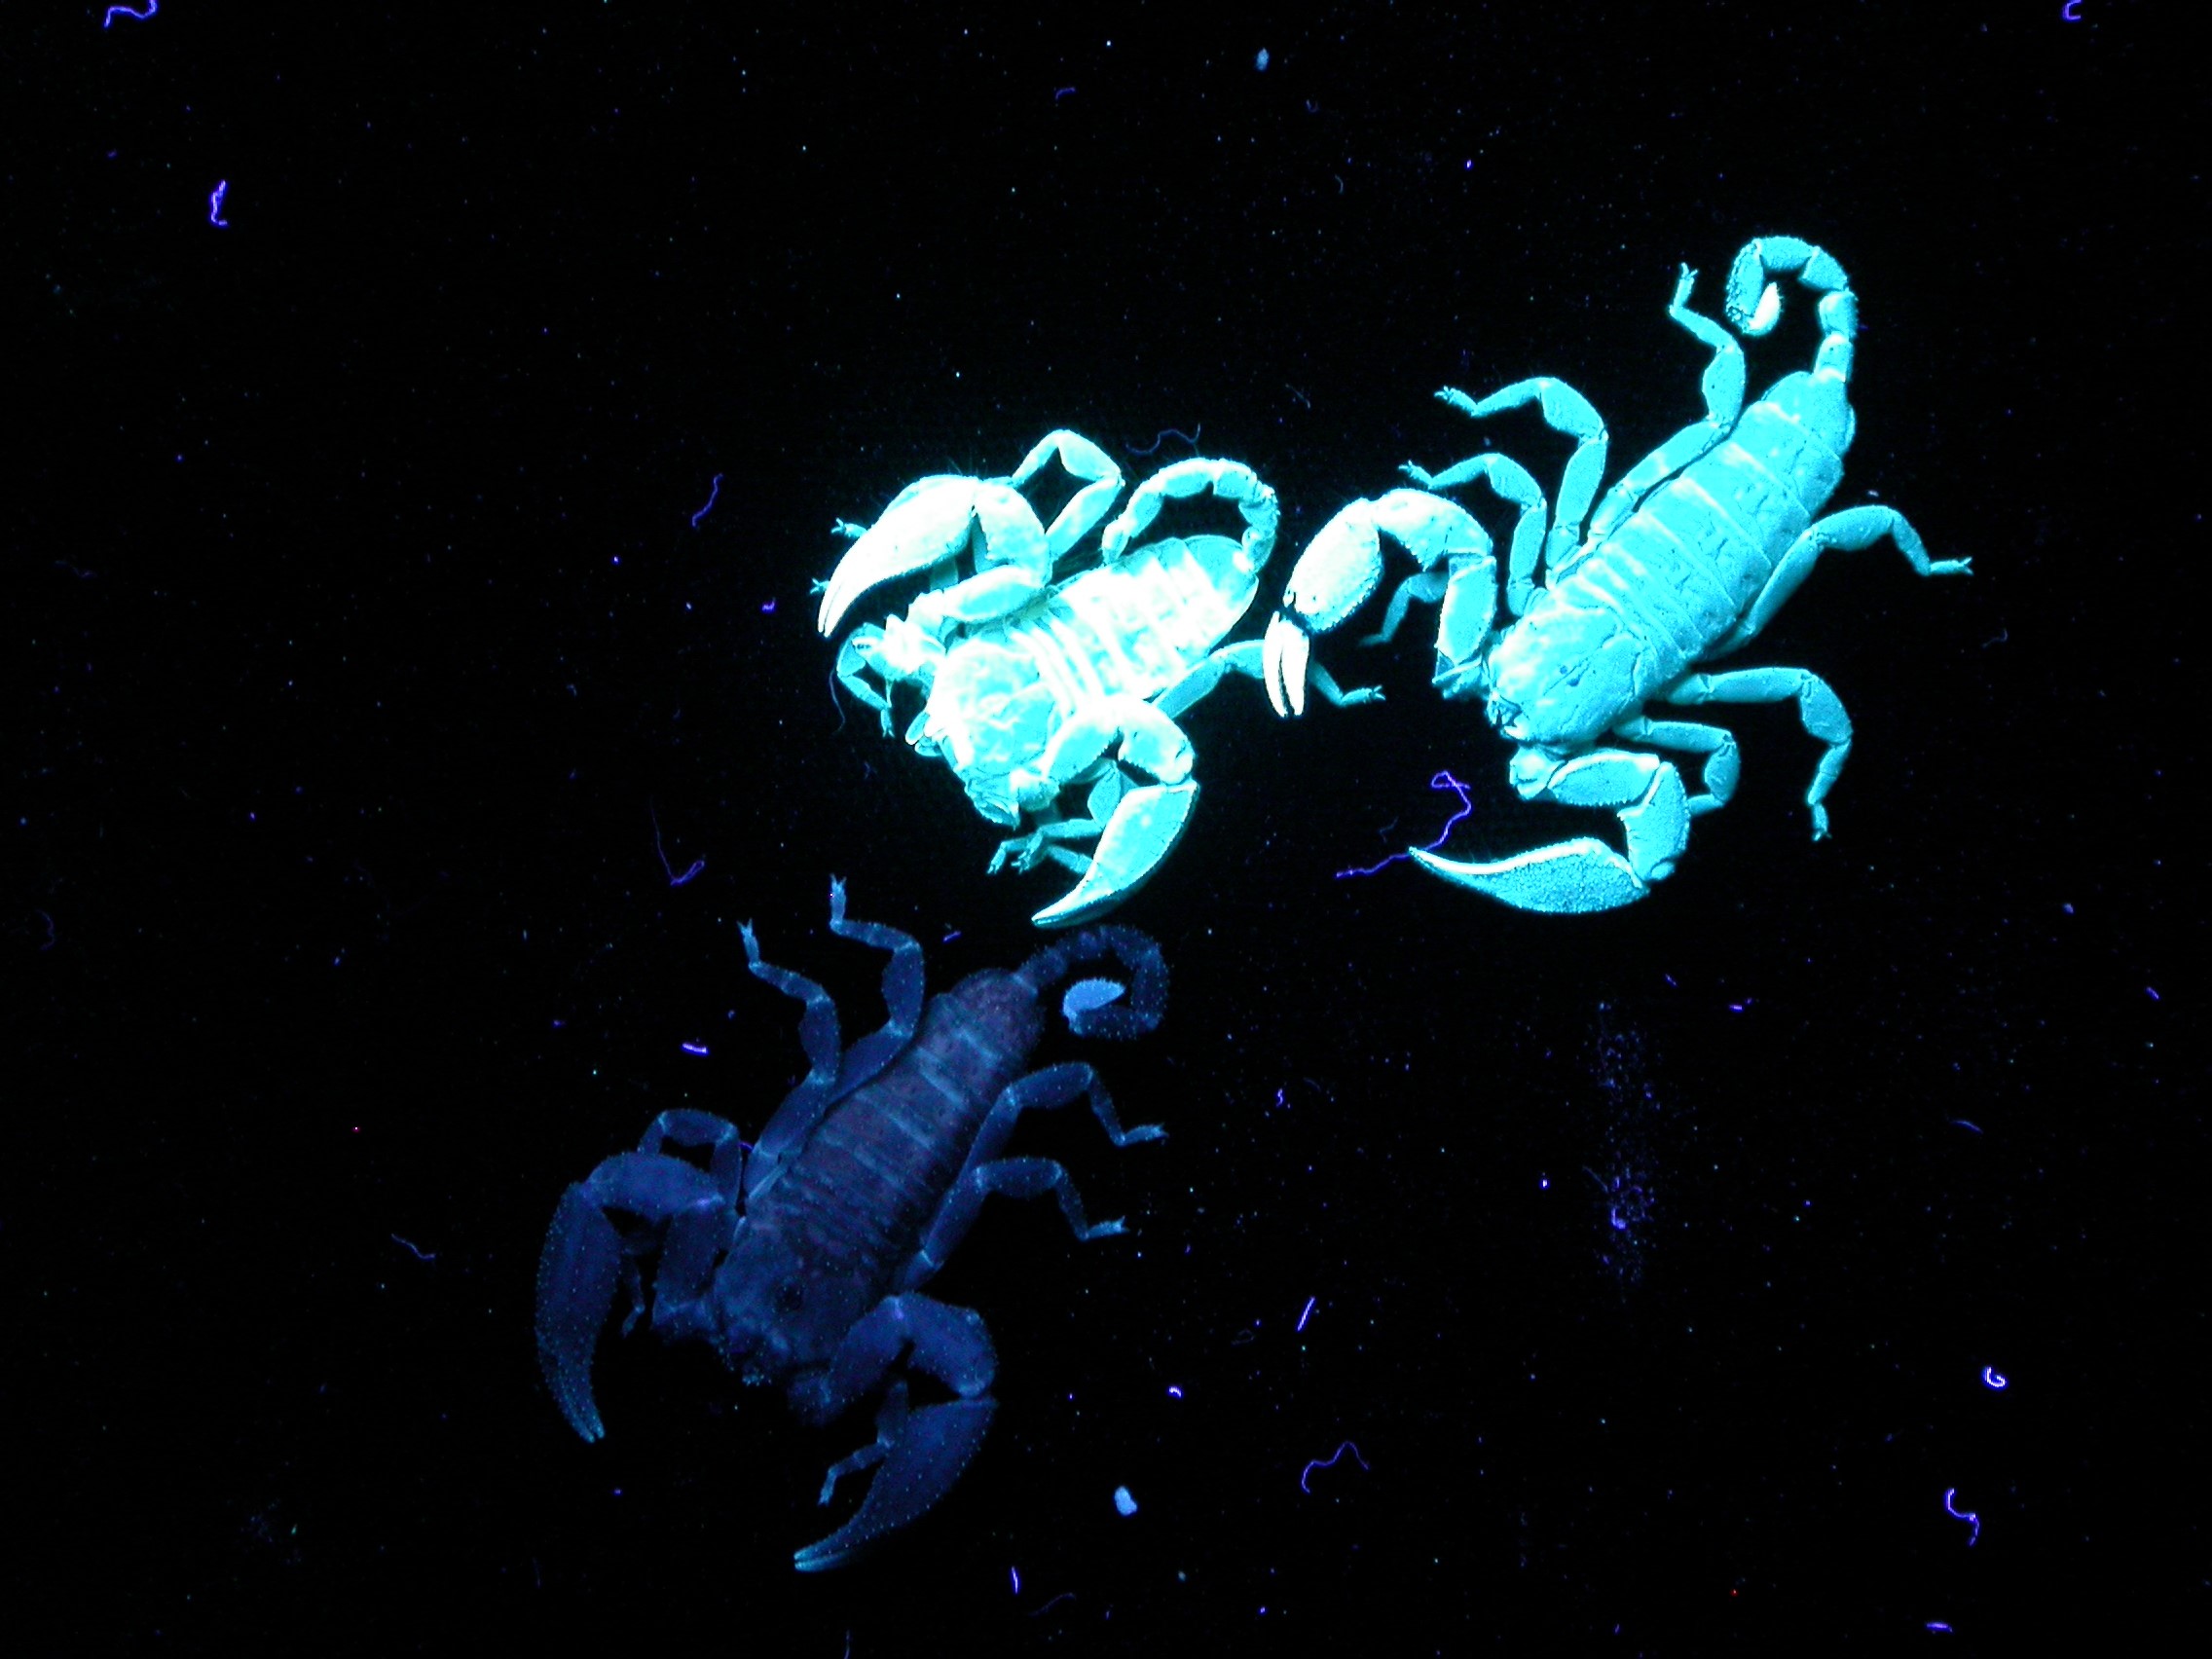 Chemistry in Pictures: Behind the scorpion’s glow